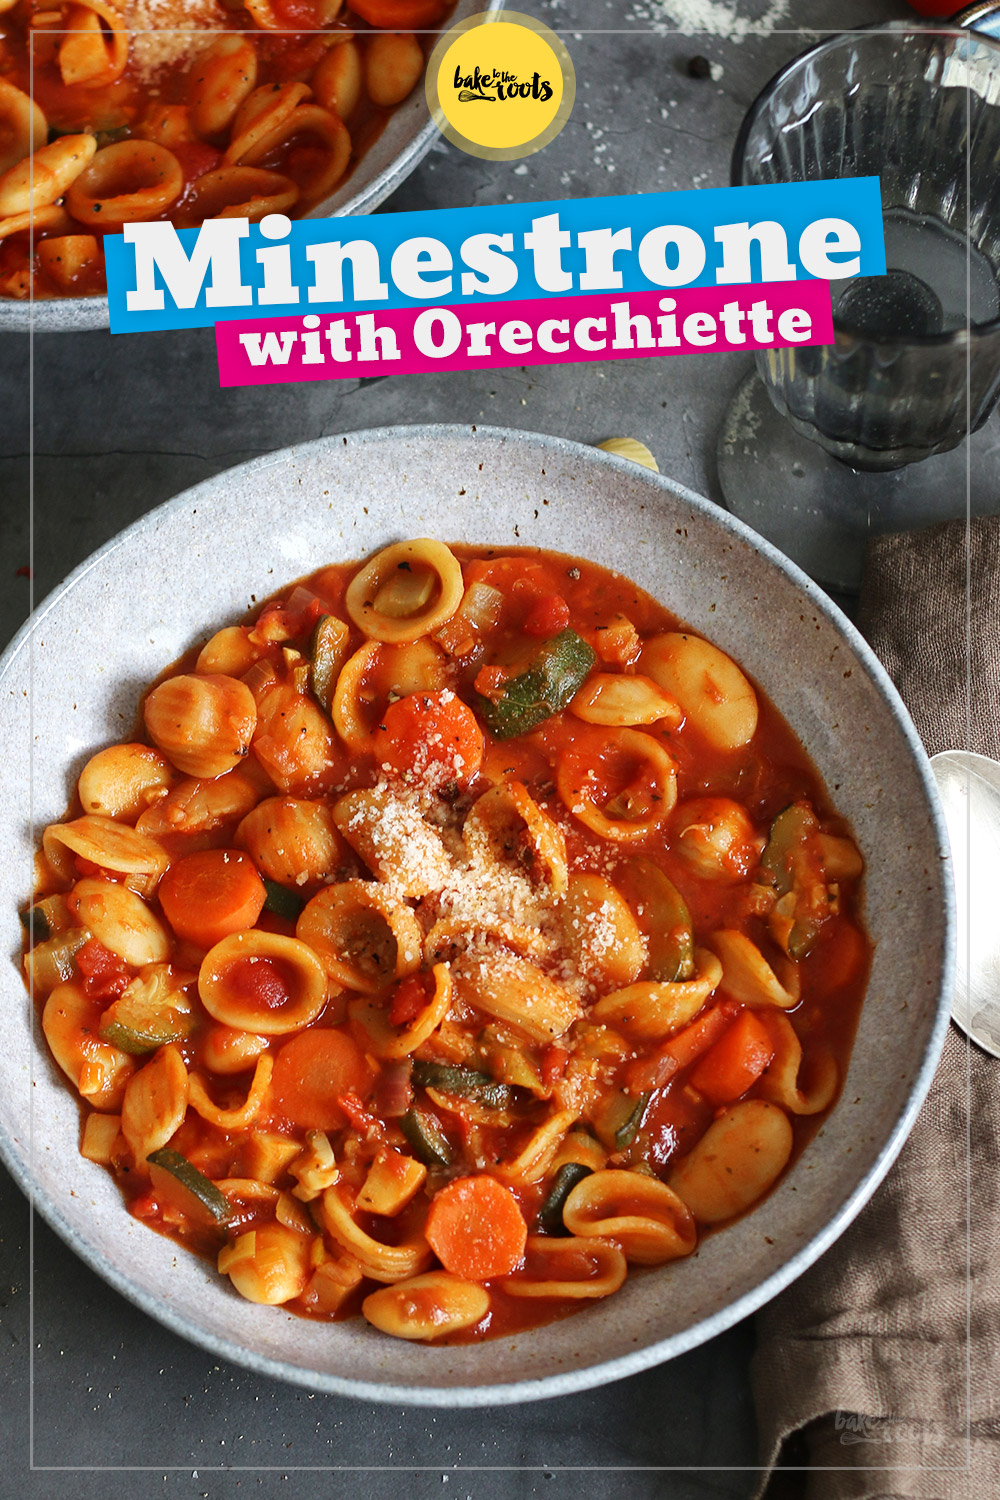 Minestrone with Orecchiette Pasta | Bake to the roots